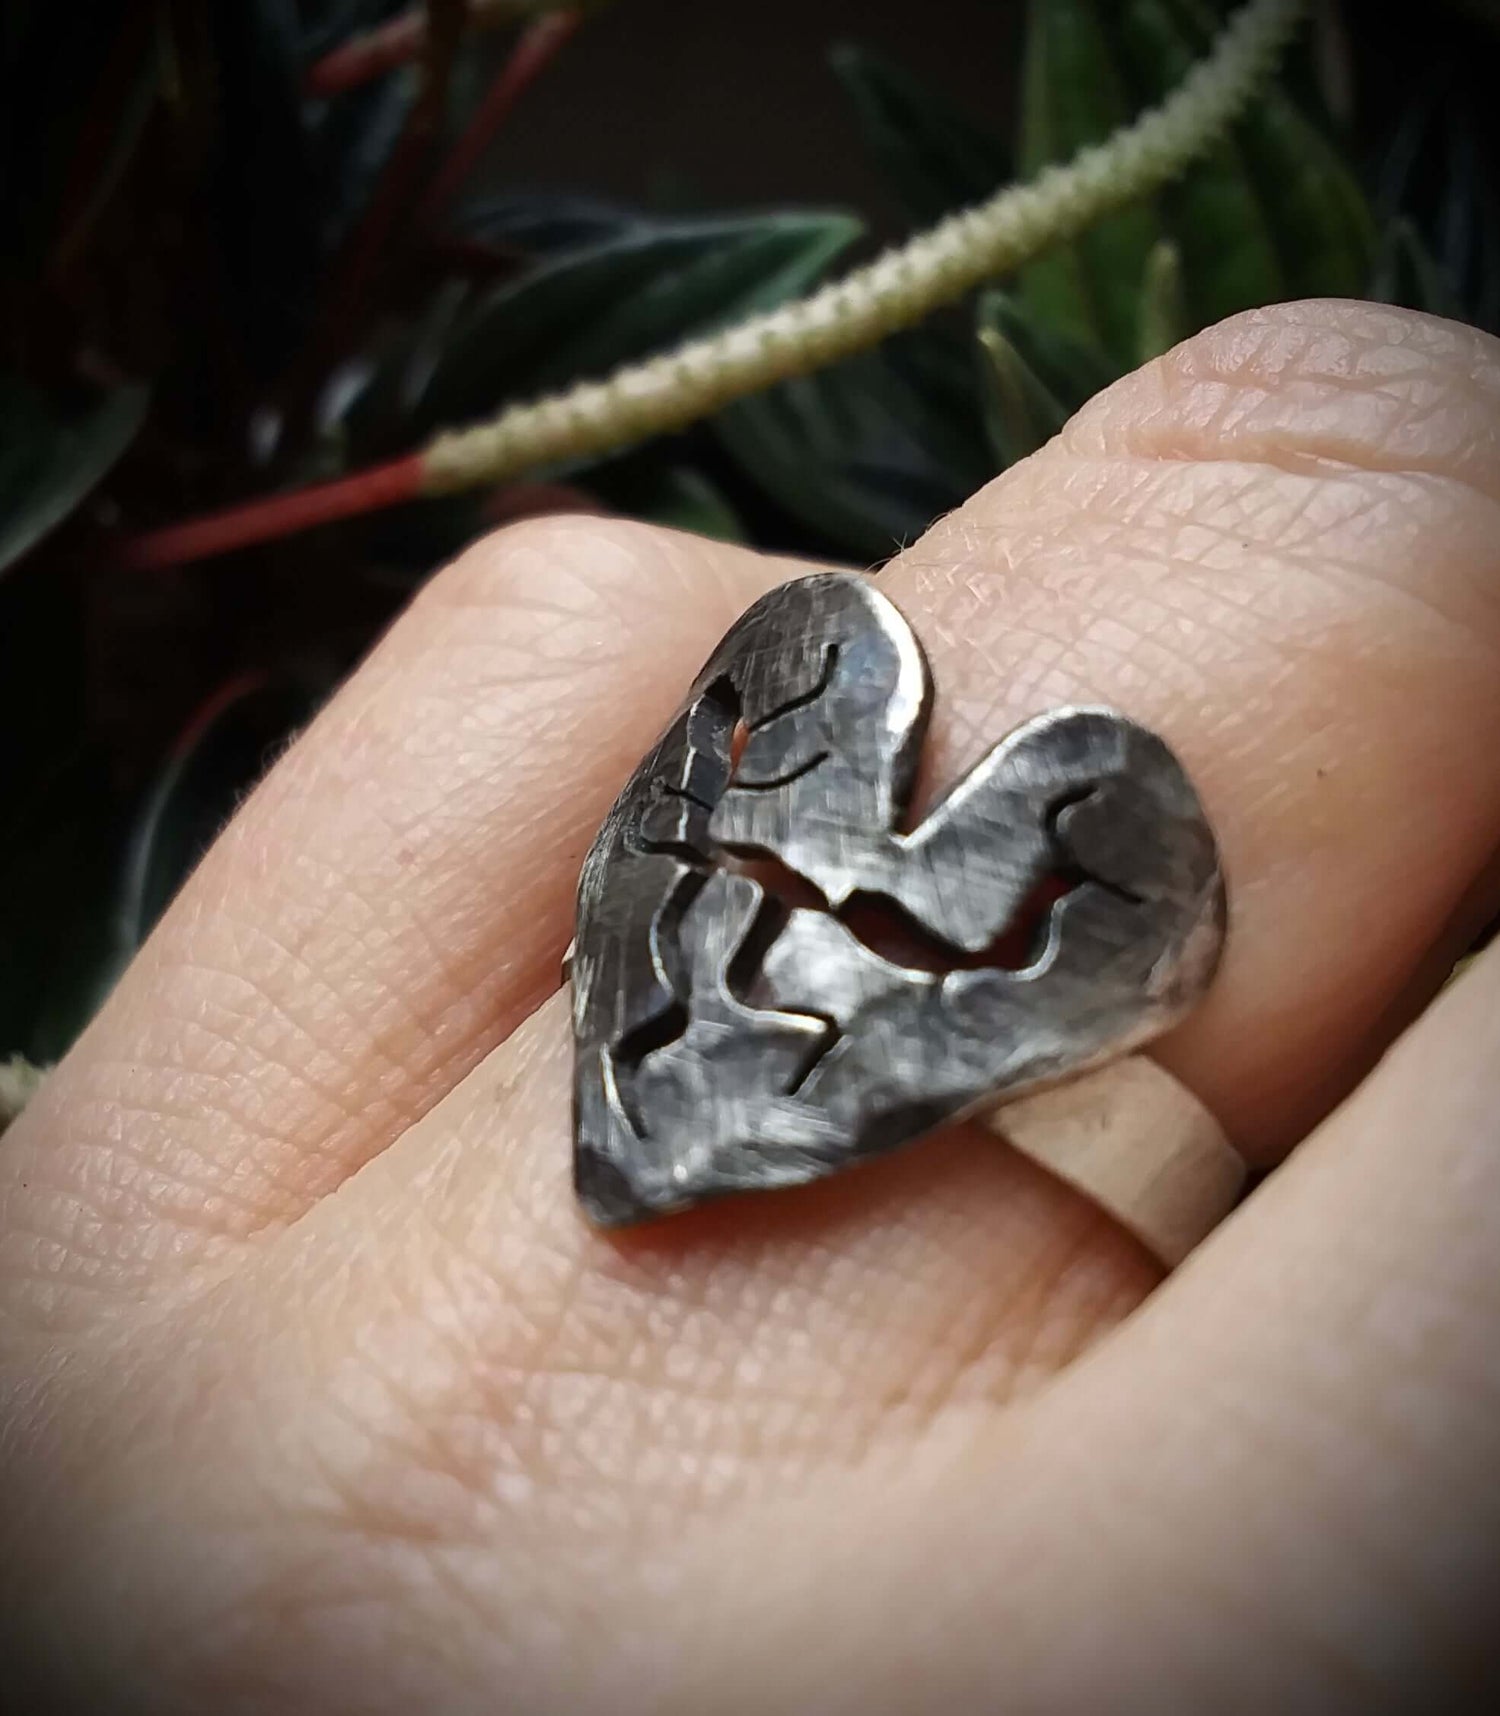 A dark silver asymmetrical heart ring that has pierced cracks and breaks worn on a folded finger in front of a botanical background.